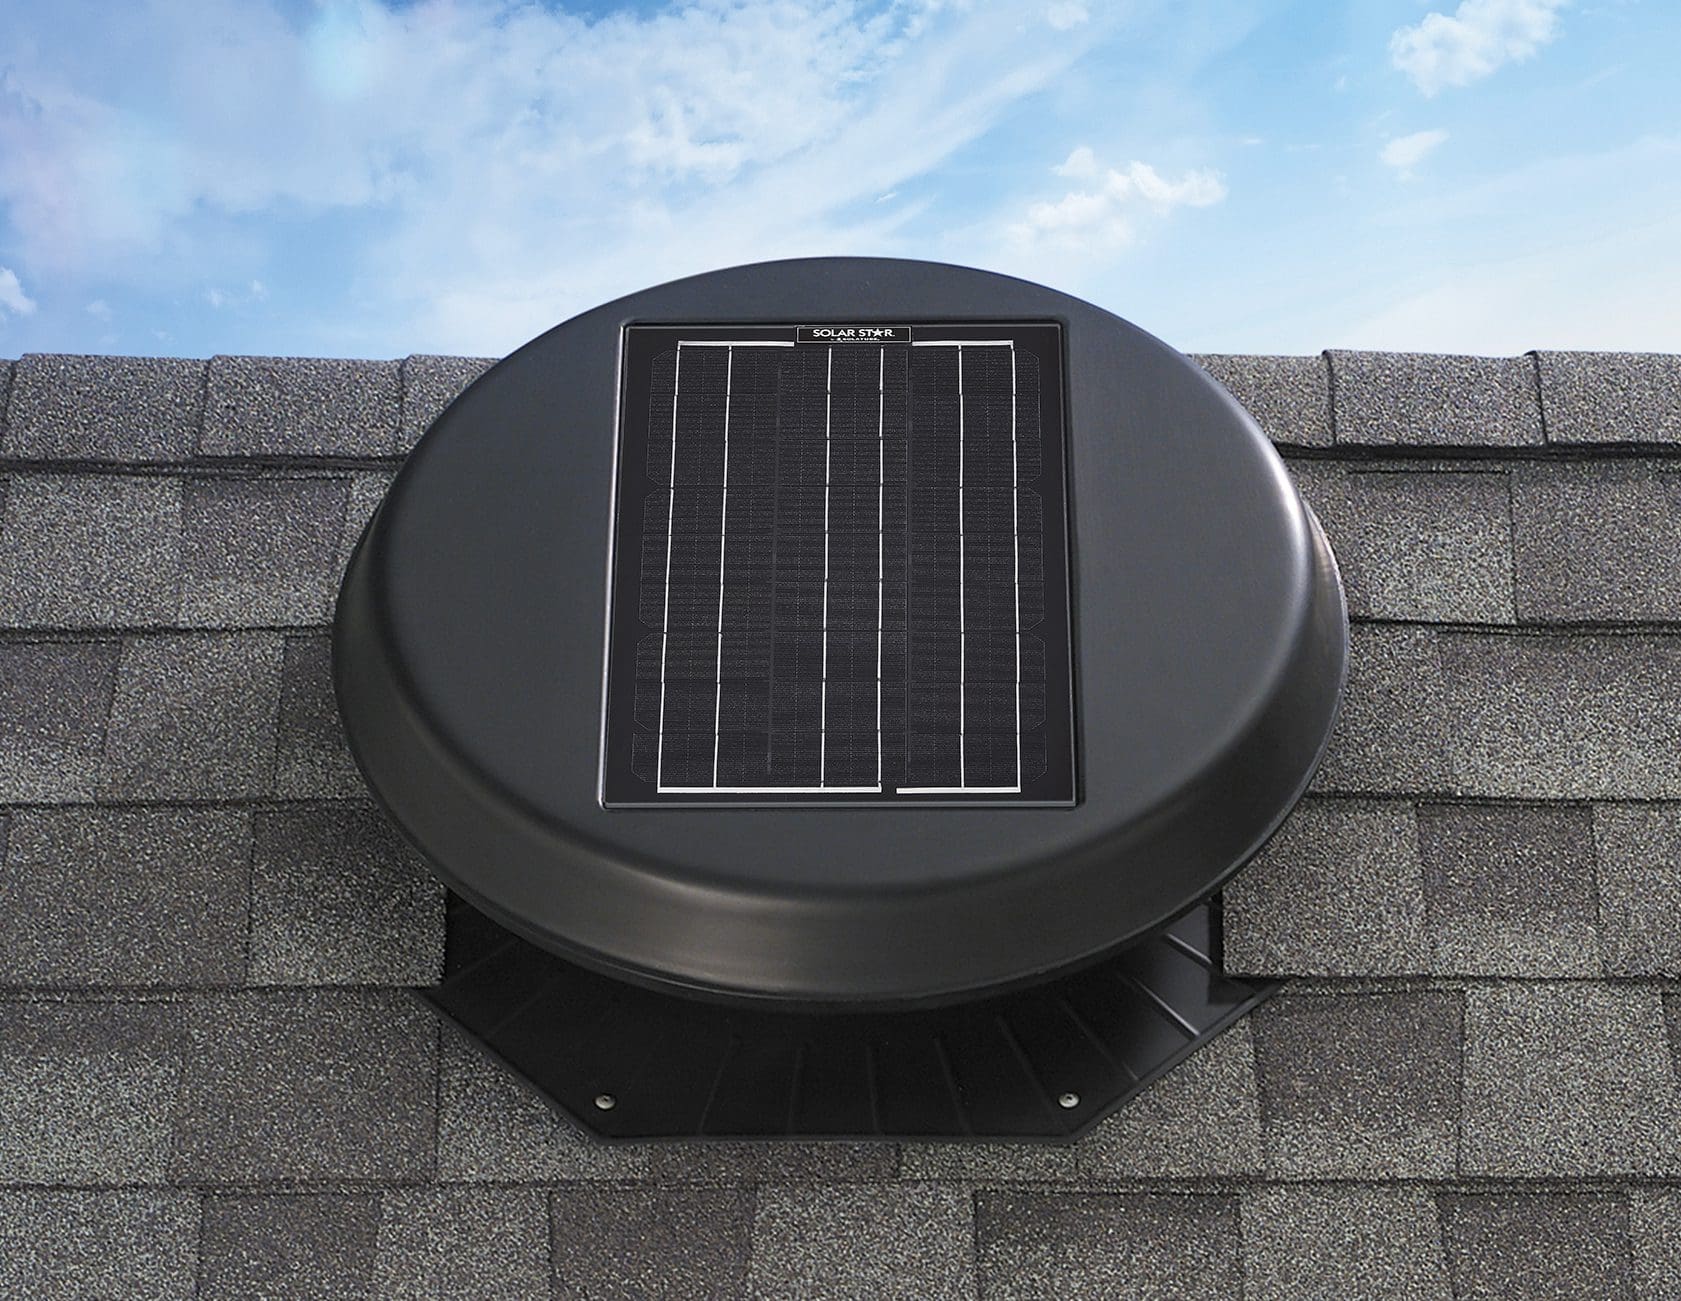 An image of the roof mount 1500 sat on a grey roof.